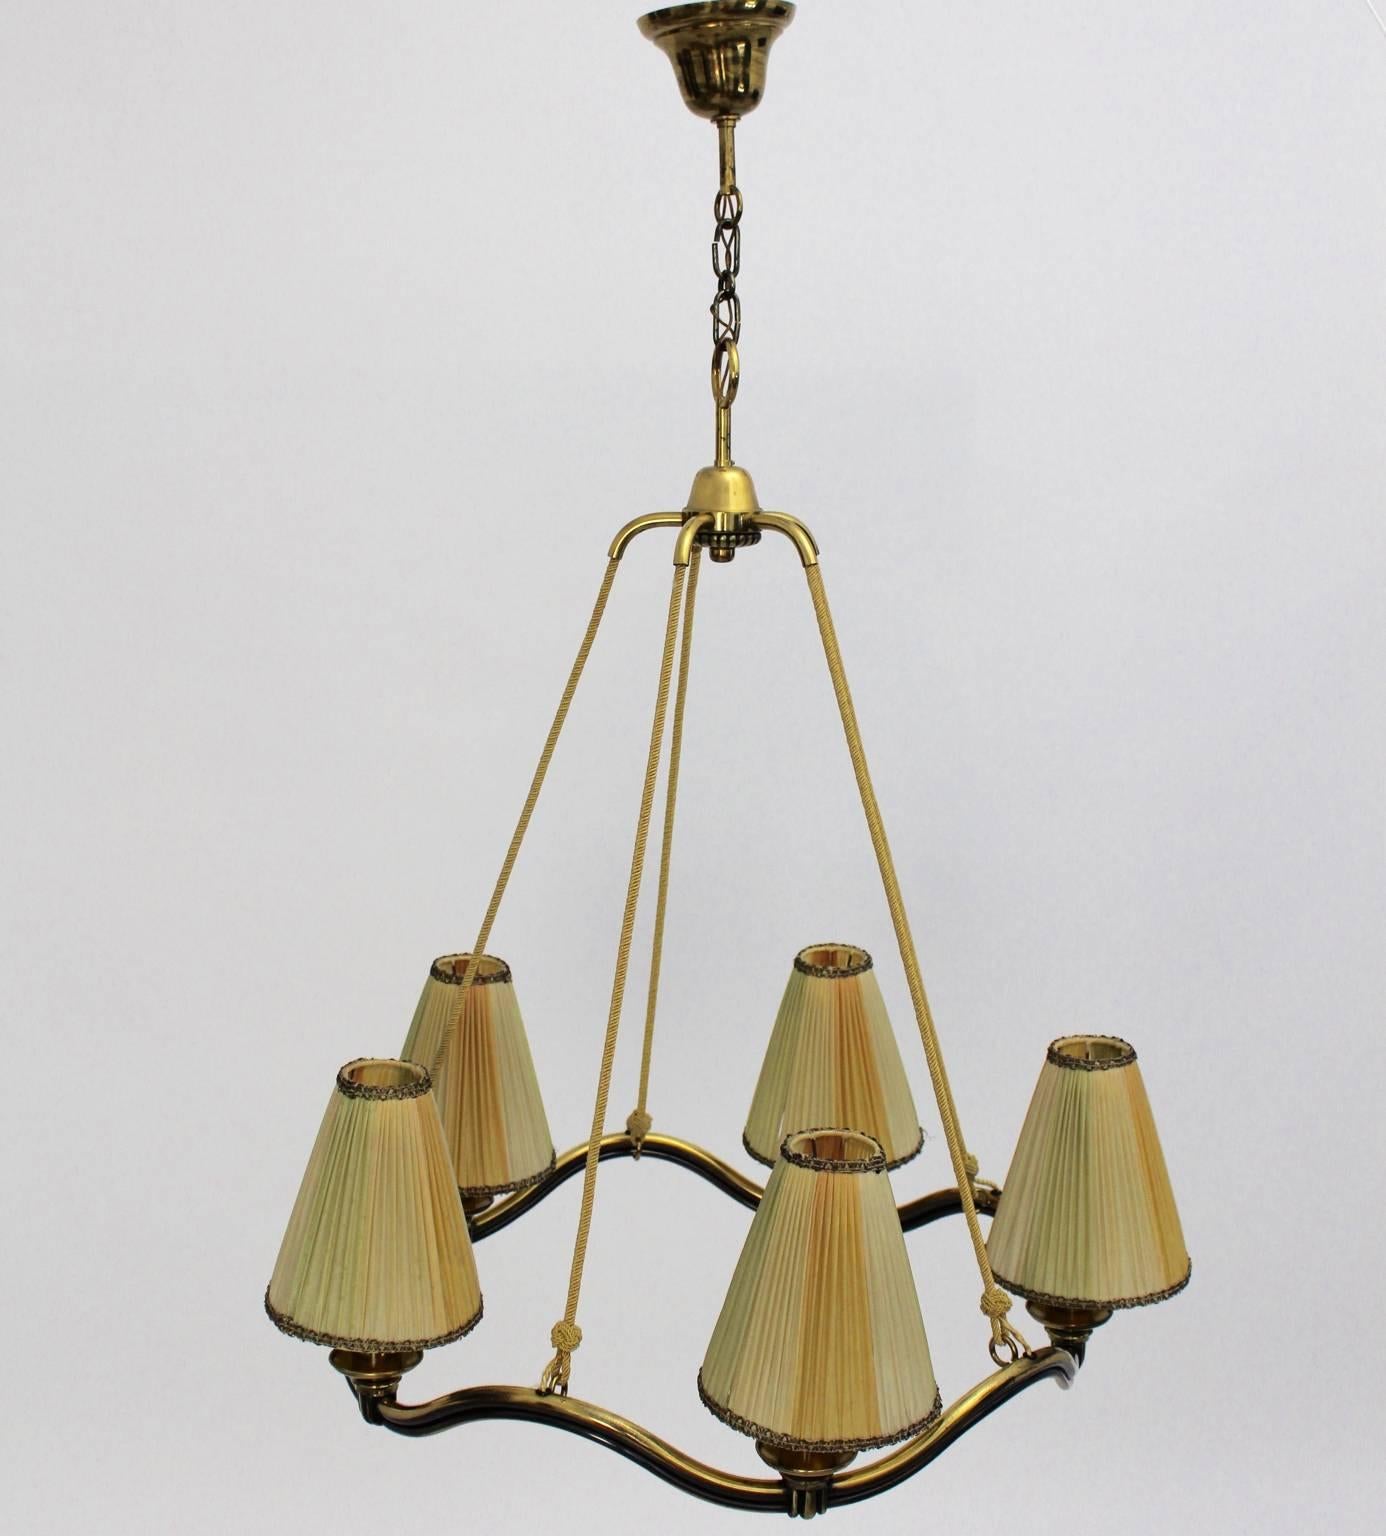 Art deco brass vintage chandelier or fixture, which design is attributed to Hugo Gorge 1930s, Vienna, Austria.
The chandelier shows a wavy line design and the brass tubes are partly stained.
Also the chandelier hangs on five yellow woven strings.